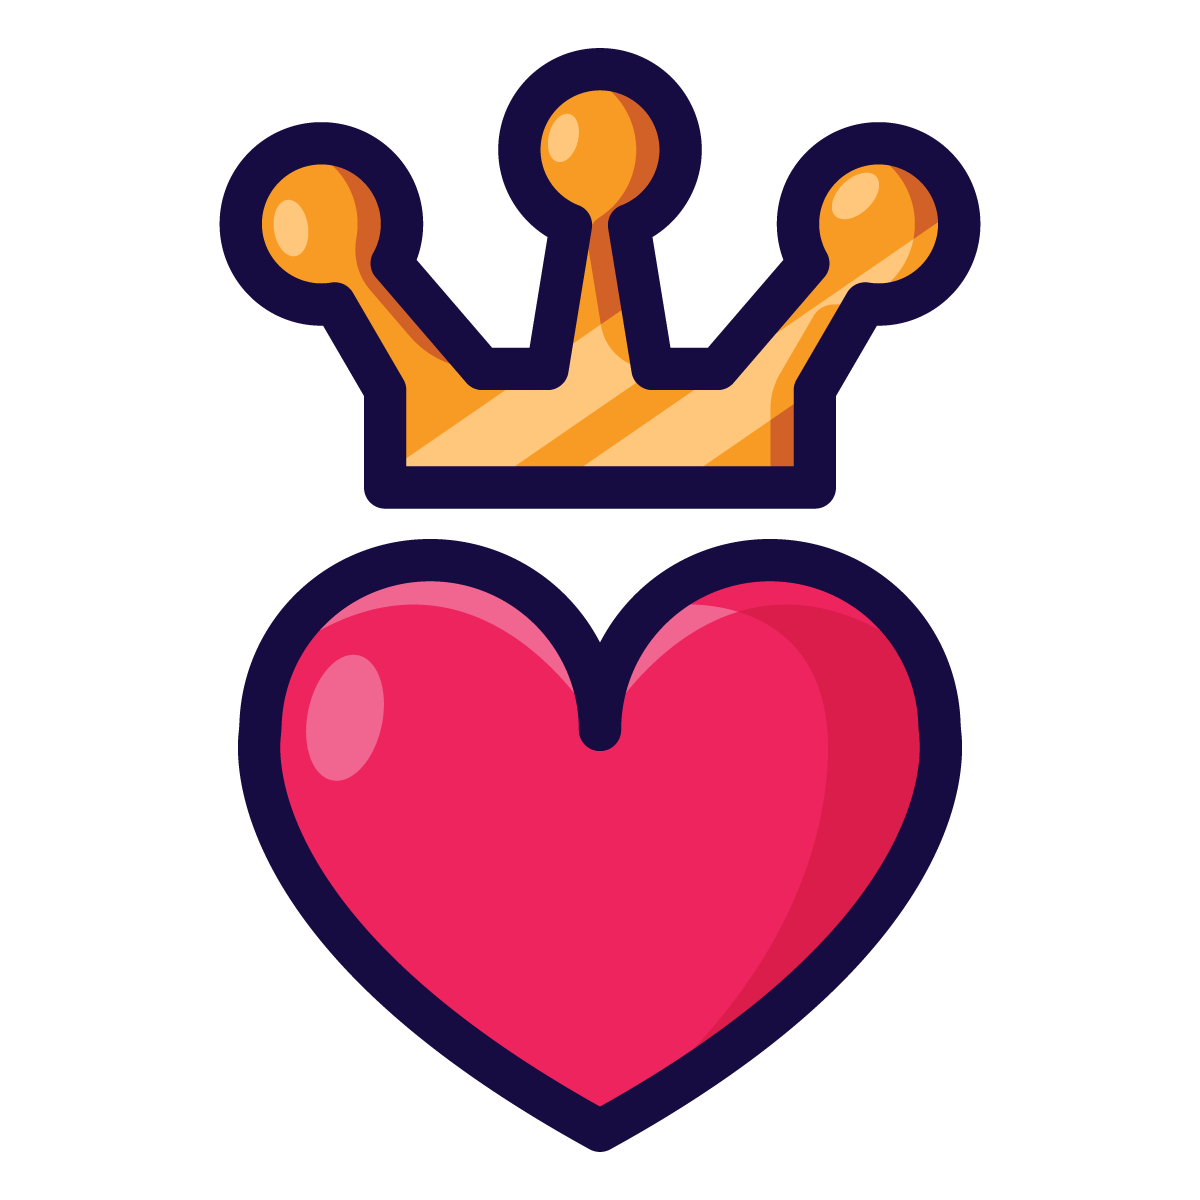 crown-heart-love-png-icon-hd-image